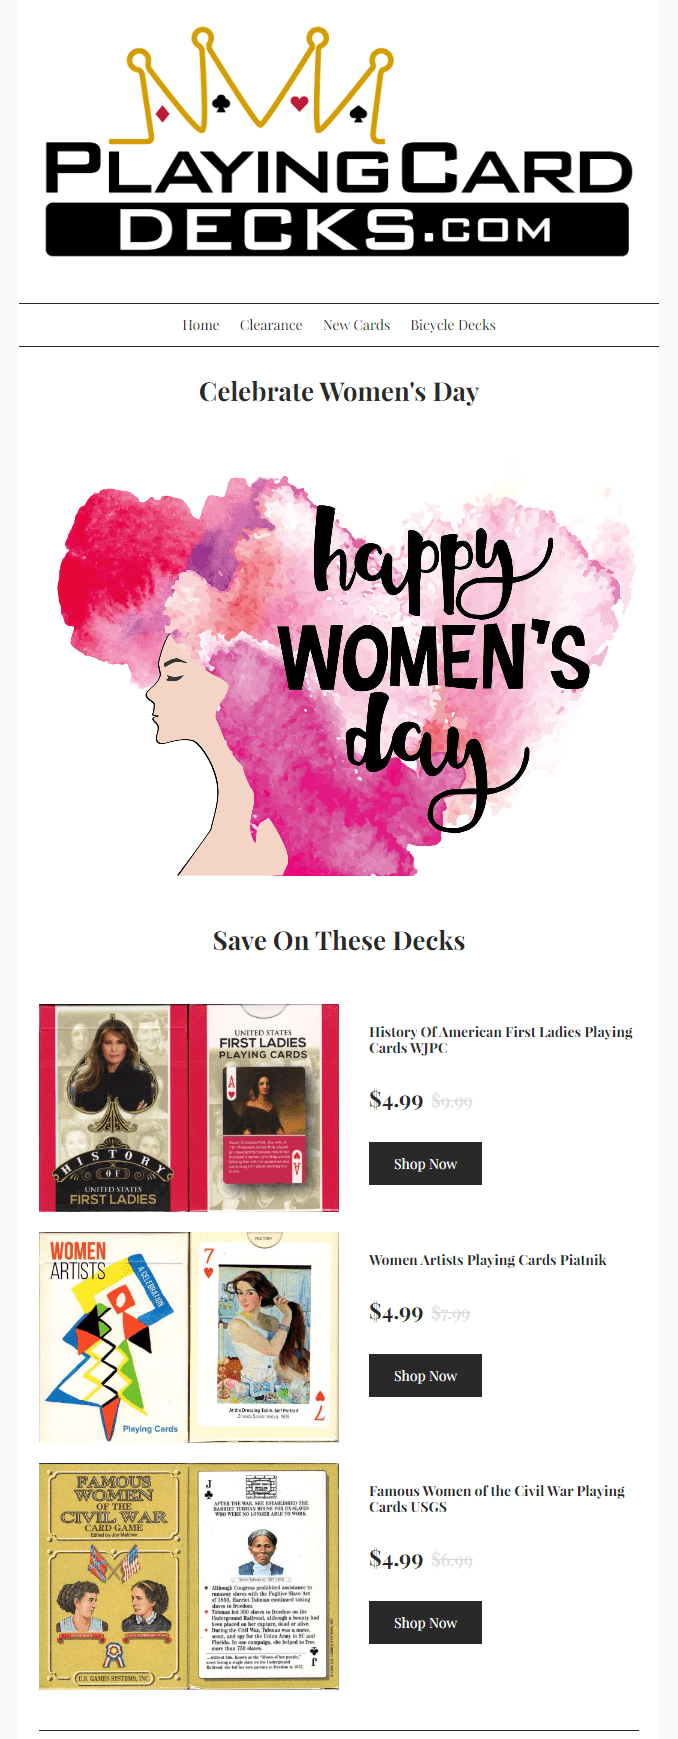 International Women's Day email example from PlayingCardDecks.com